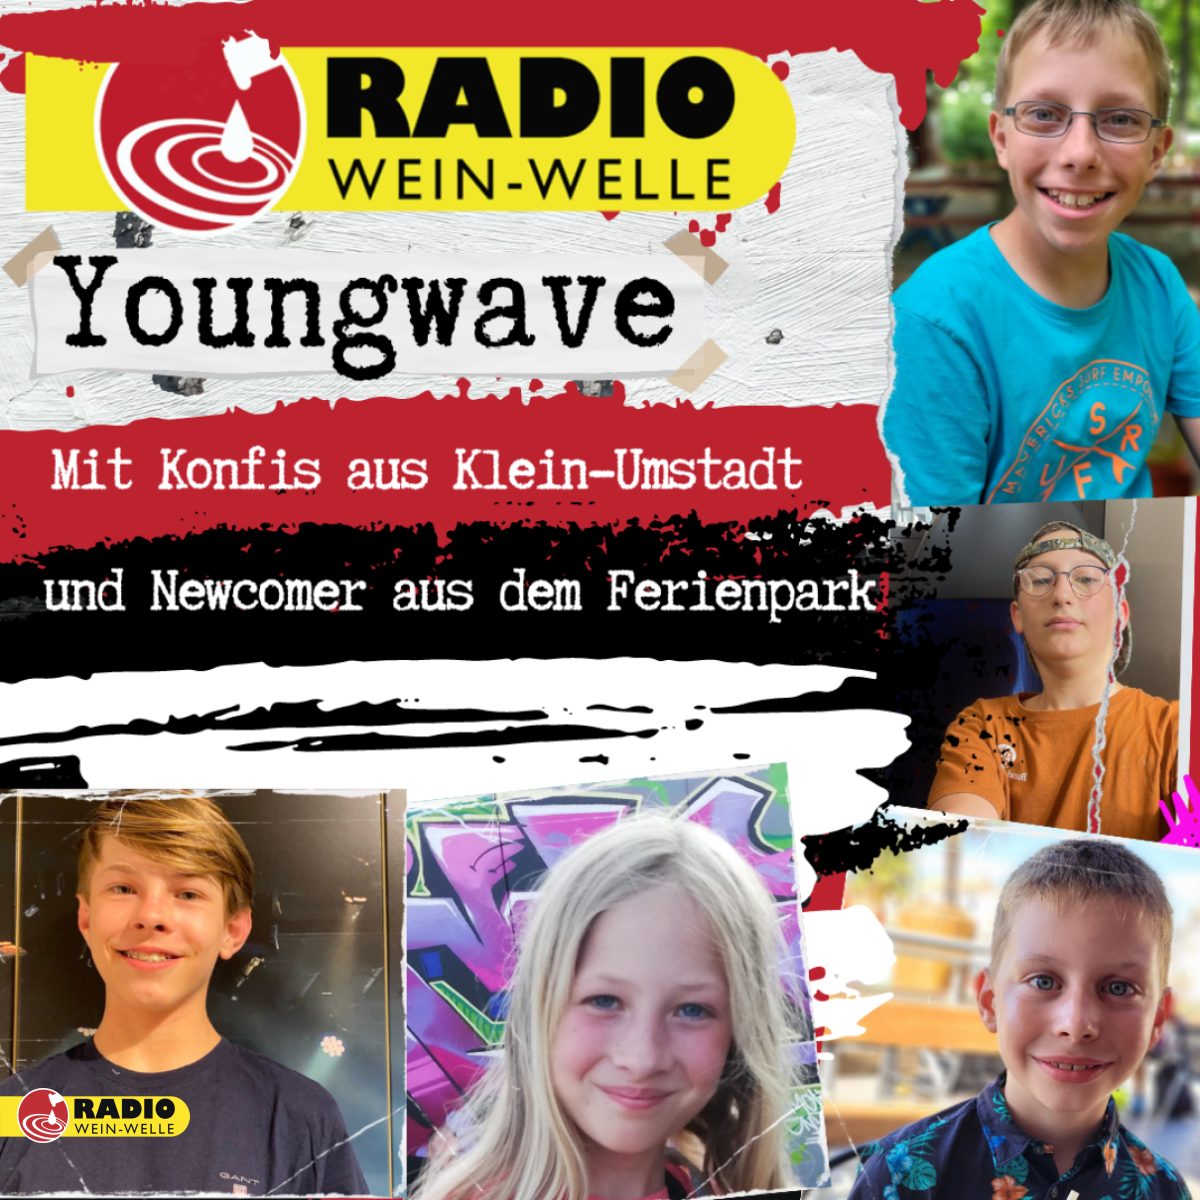 Youngwave